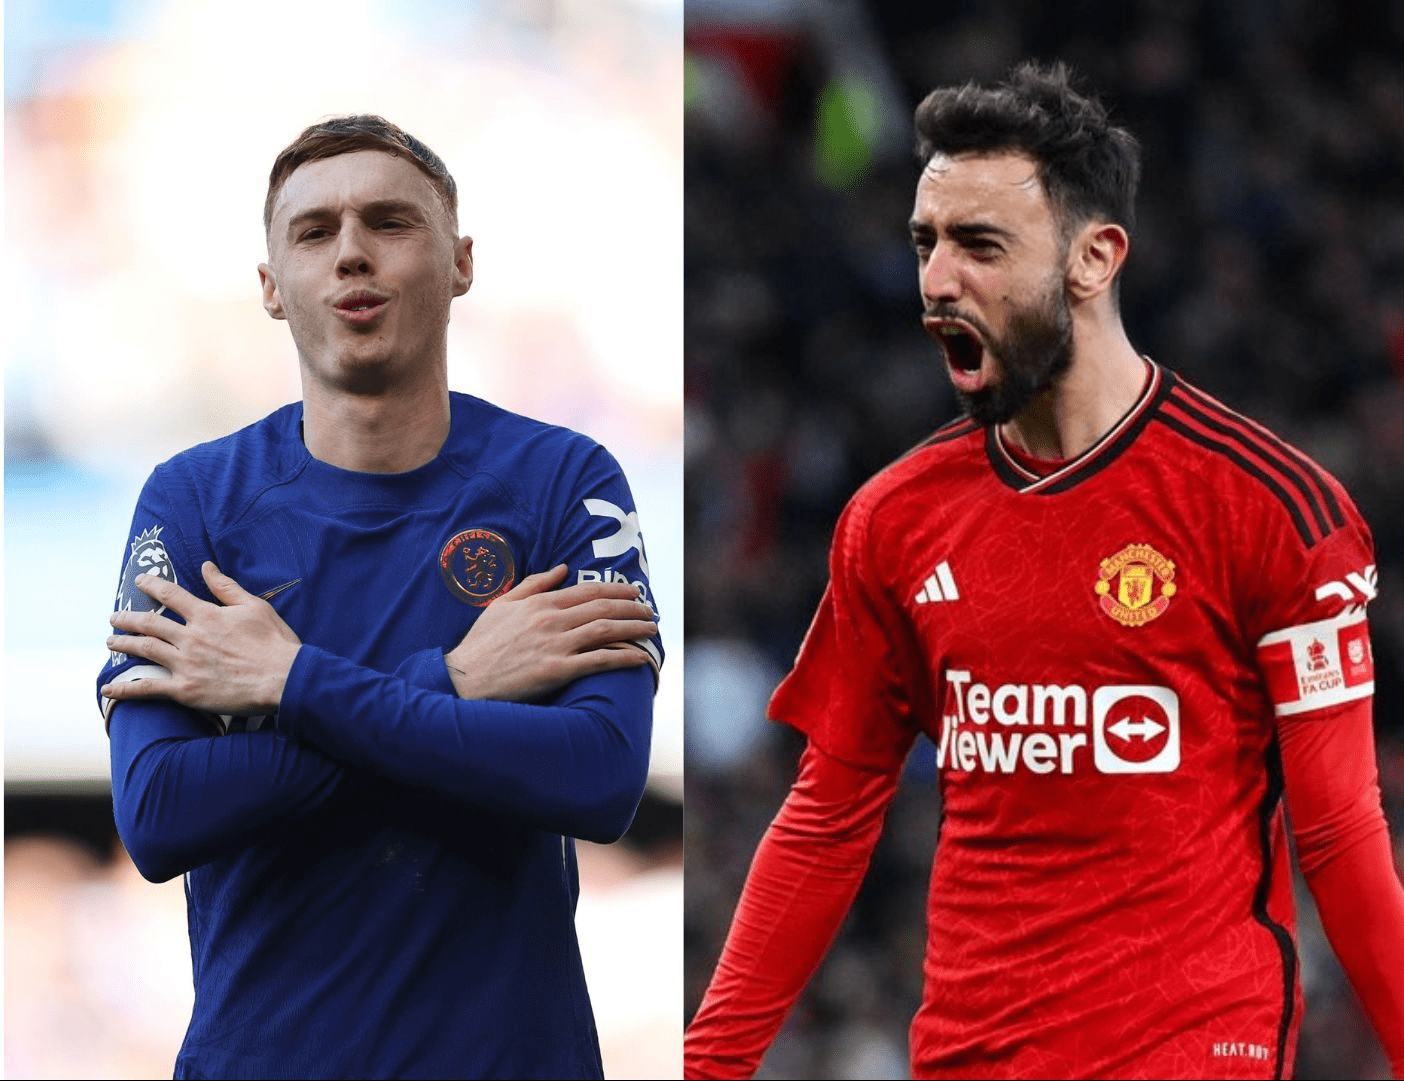 You are currently viewing Chelsea vs Man Utd: Palmer, Fernandes battle in must-win rivalry